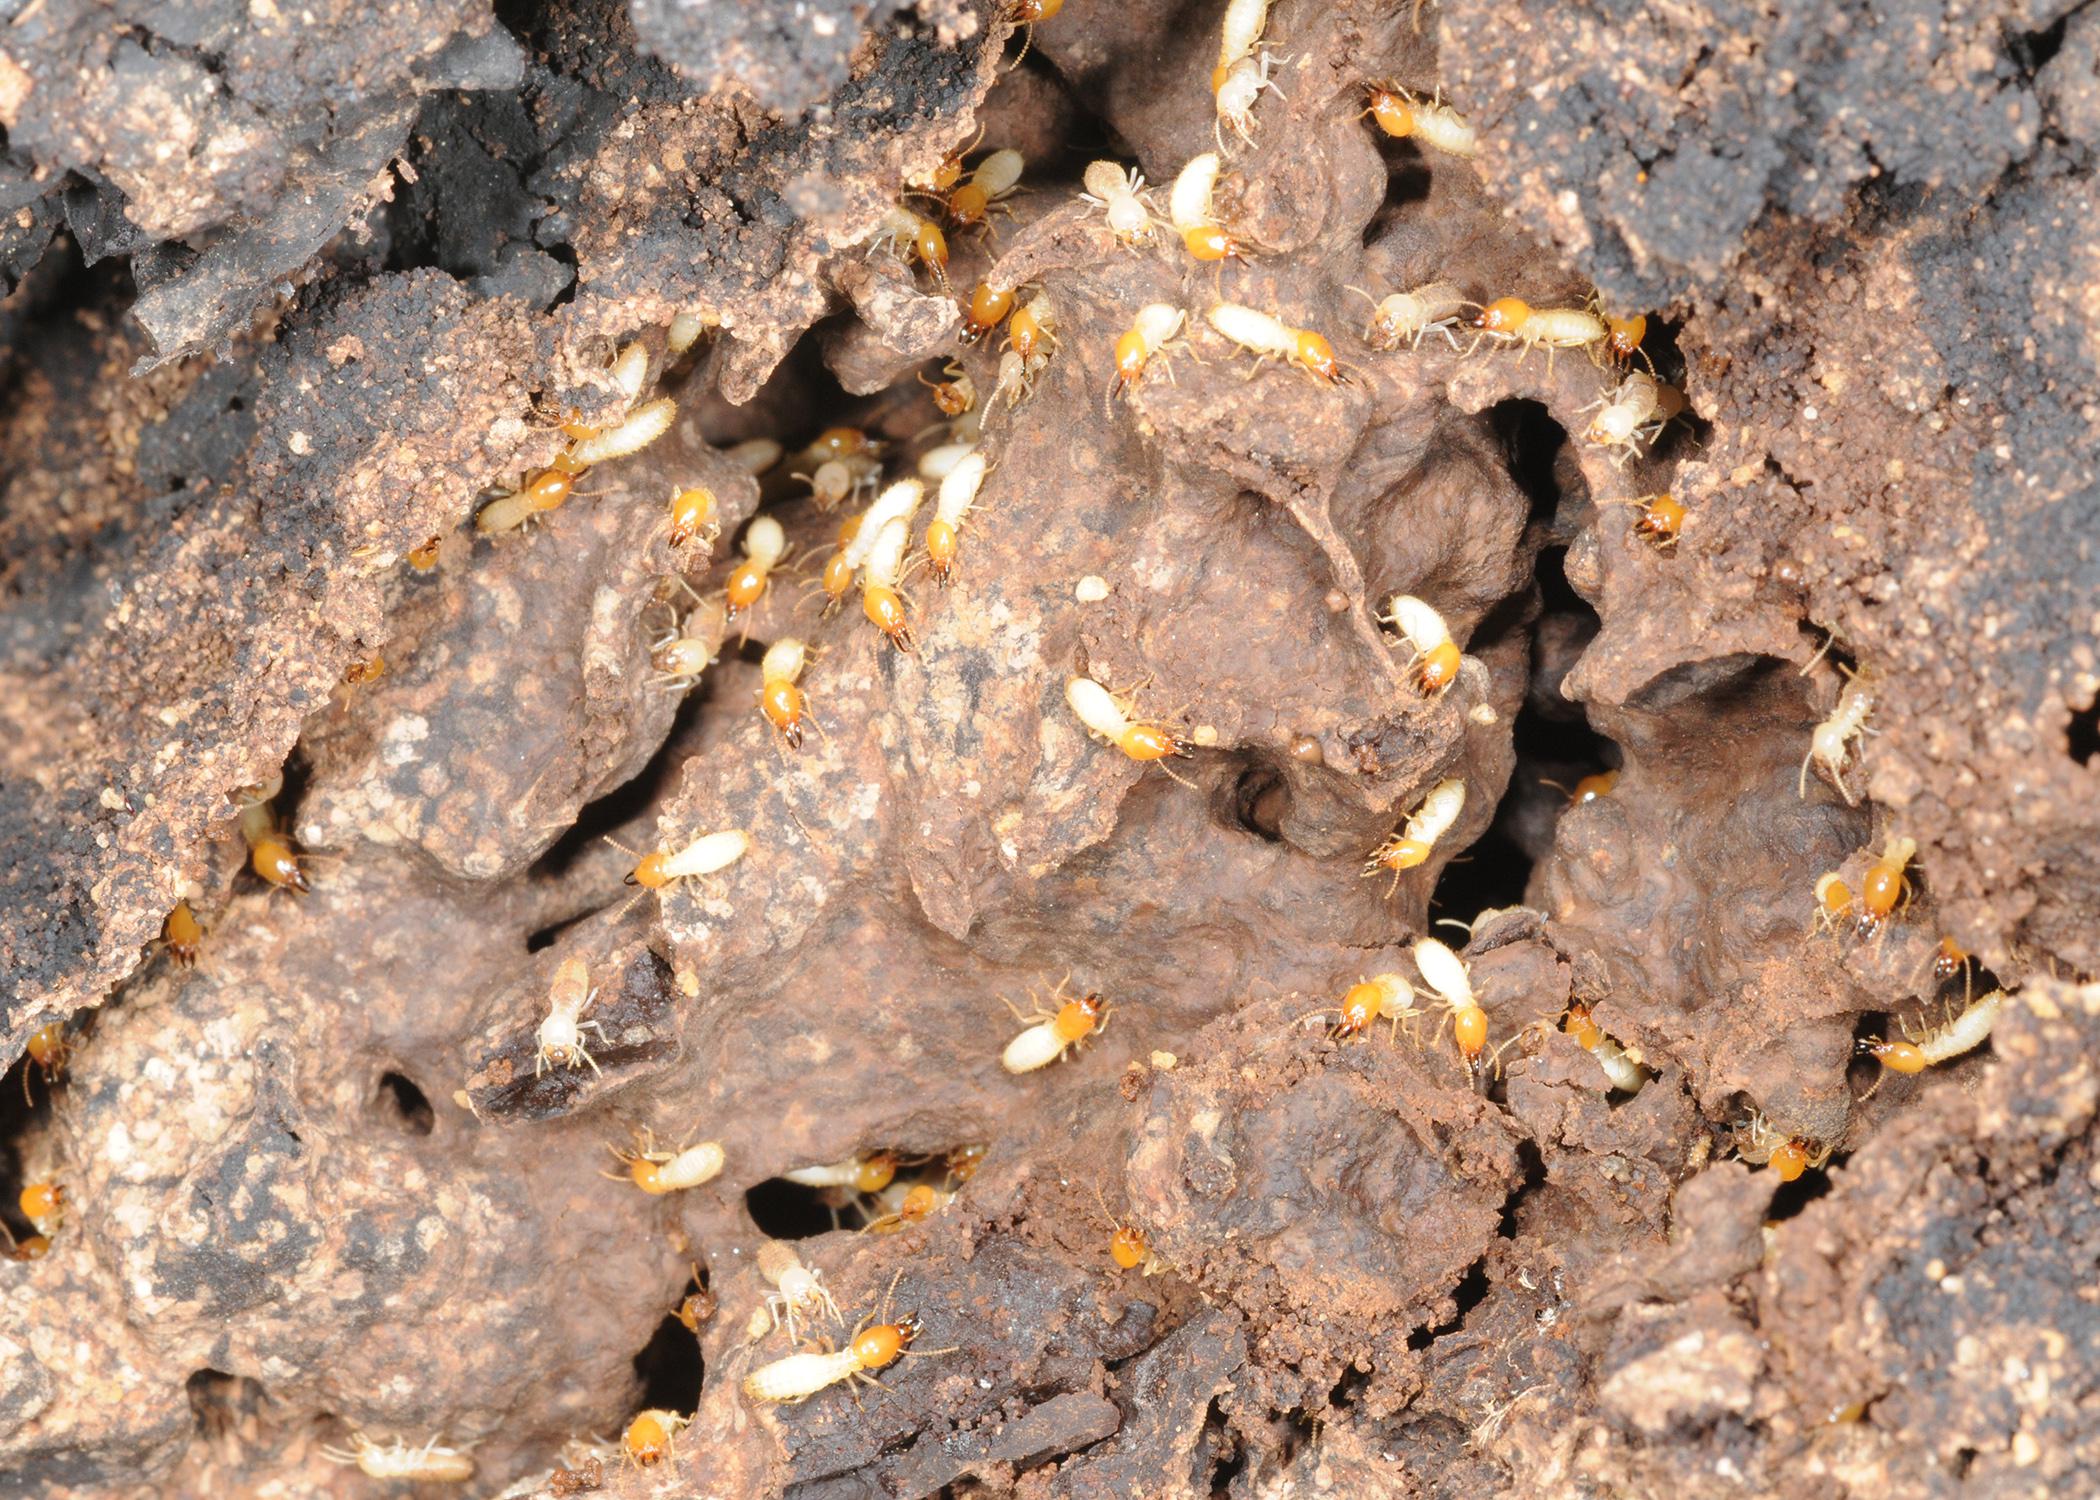 Numerous tiny, white insects with brown heads dot a surface full of holes and crevices.